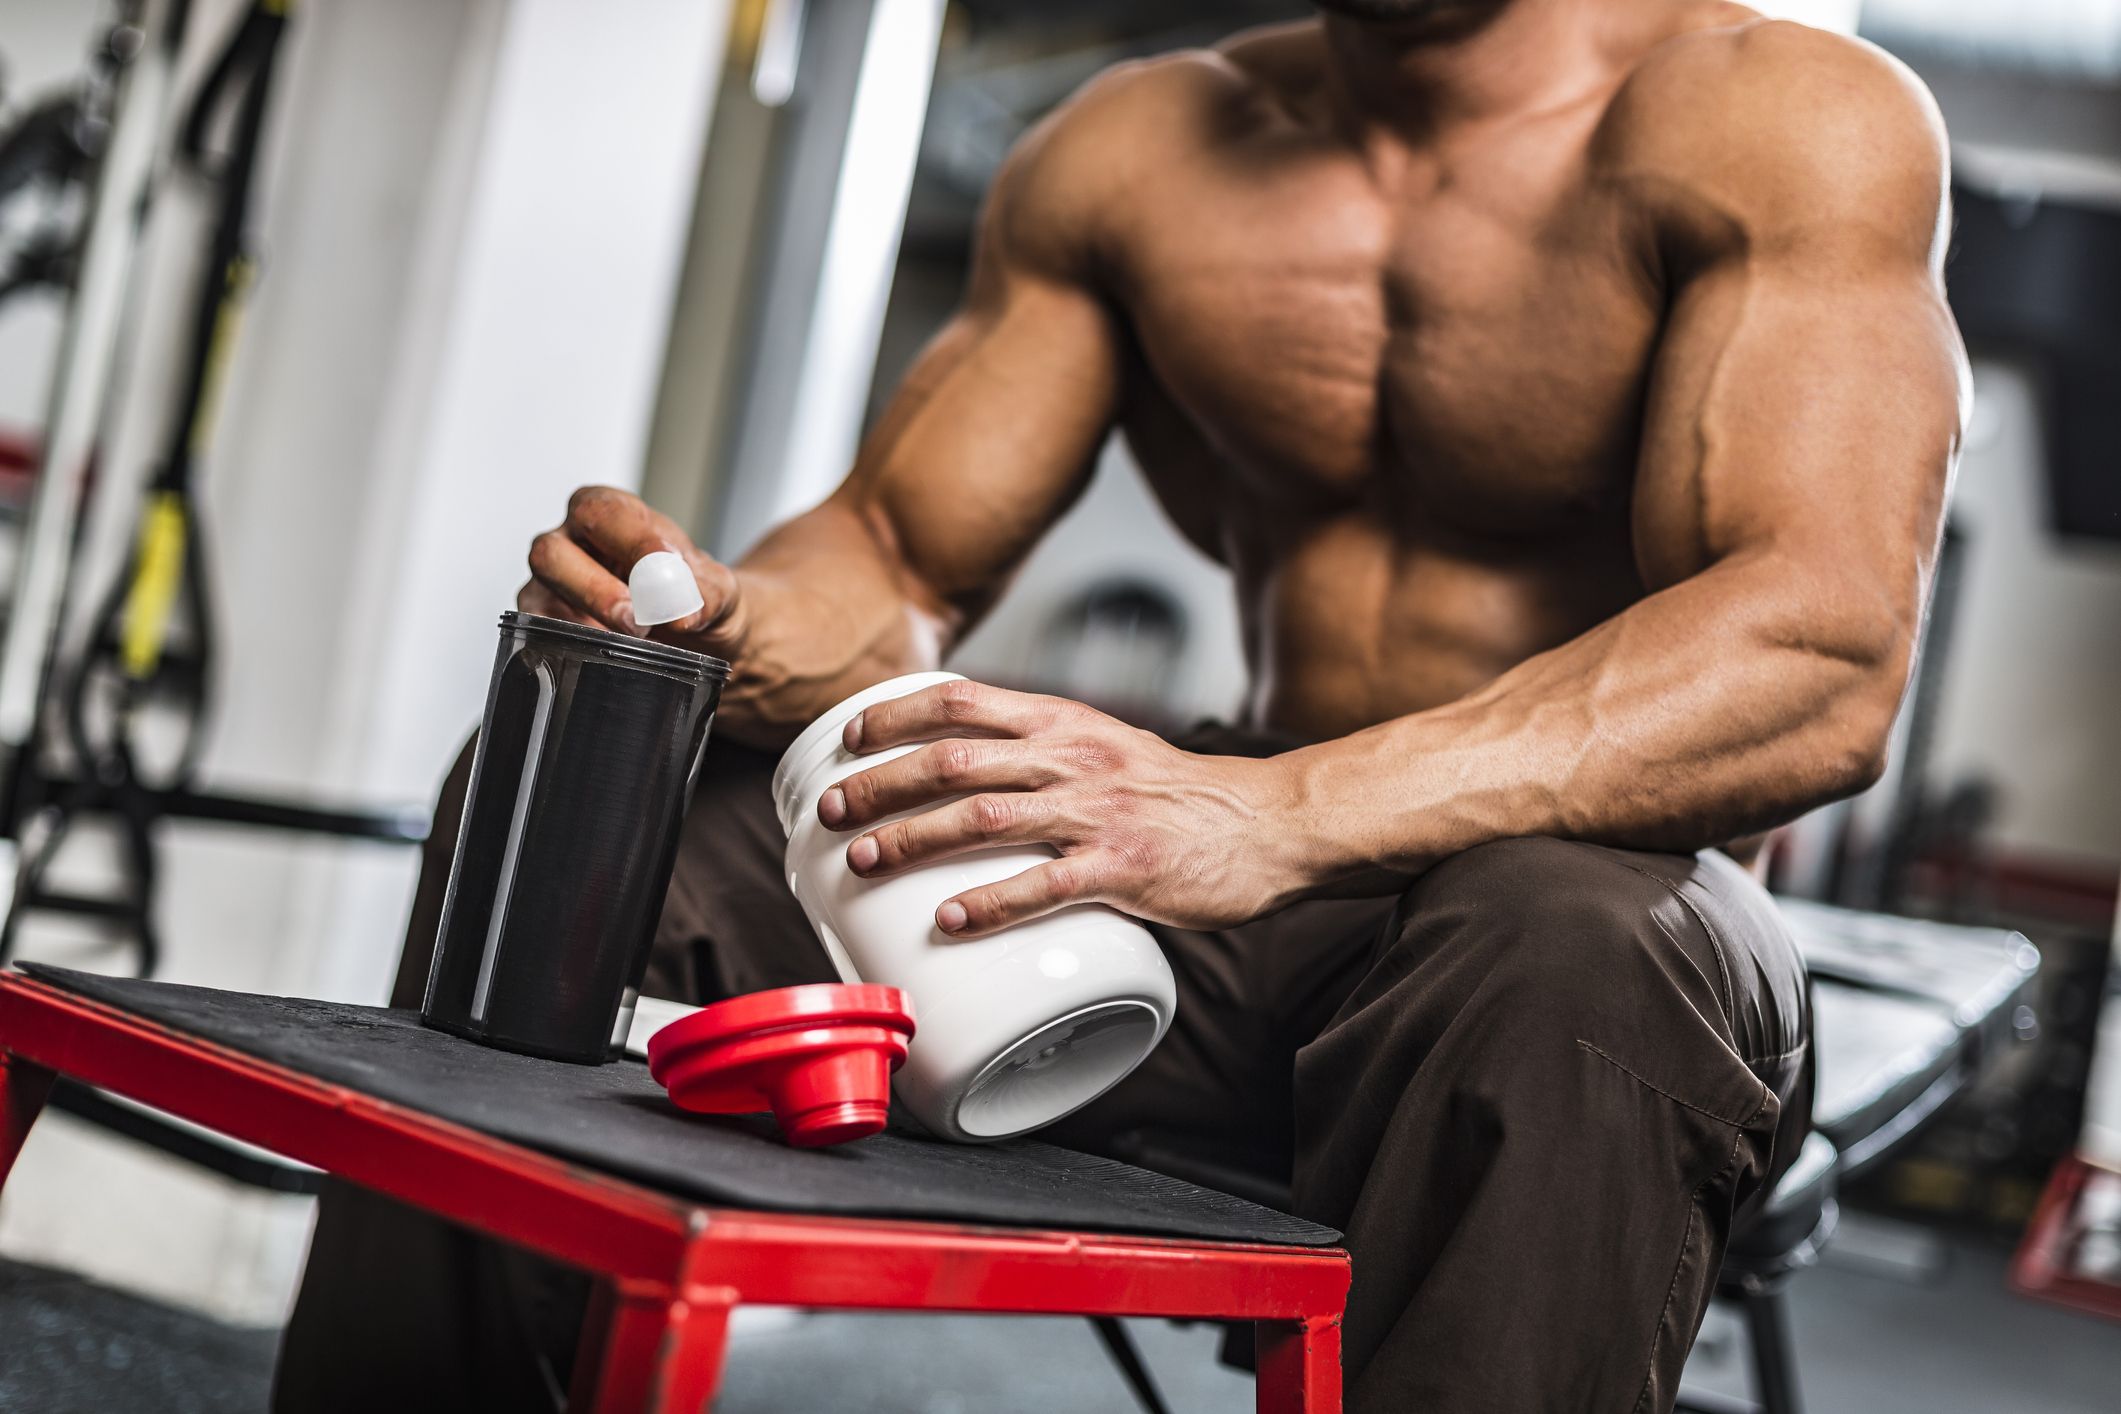 Best Creatine: What Is It and Should You Be Using It?